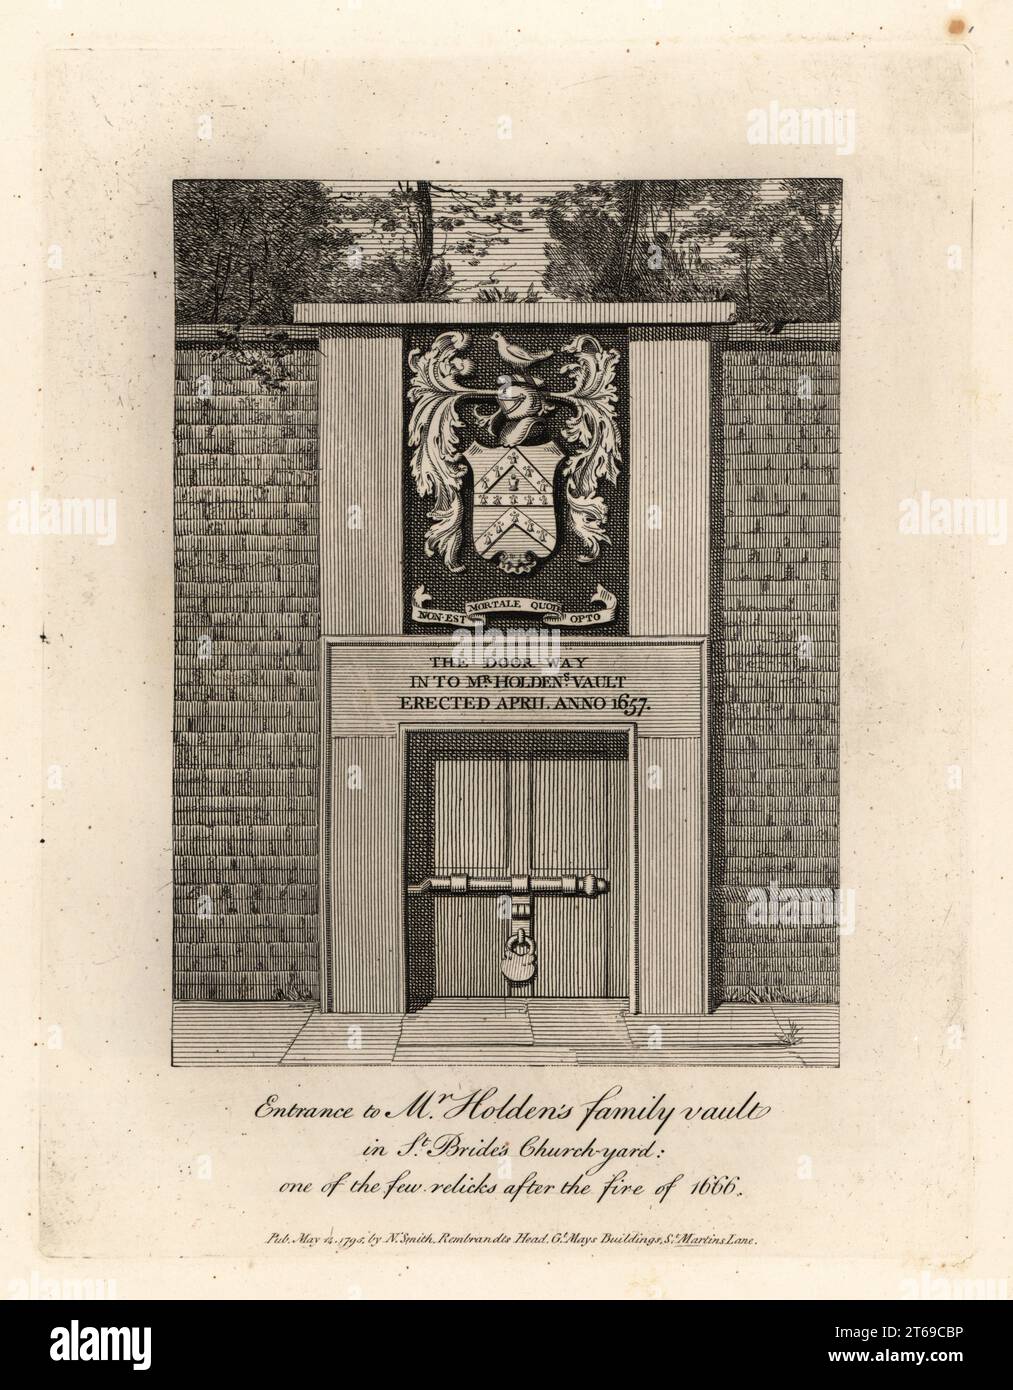 Entrance to Mr. Holdens Family Vault in St. Brides churchyard, one of the few relics after the Fire of London 1666. Built in 1657 with coat of arms above the door. Copperplate engraving by John Thomas Smith after original drawings by members of the Society of Antiquaries from his J.T. Smiths Antiquities of London and its Environs, J. Sewell, R. Folder, J. Simco, London, 1795. Stock Photo